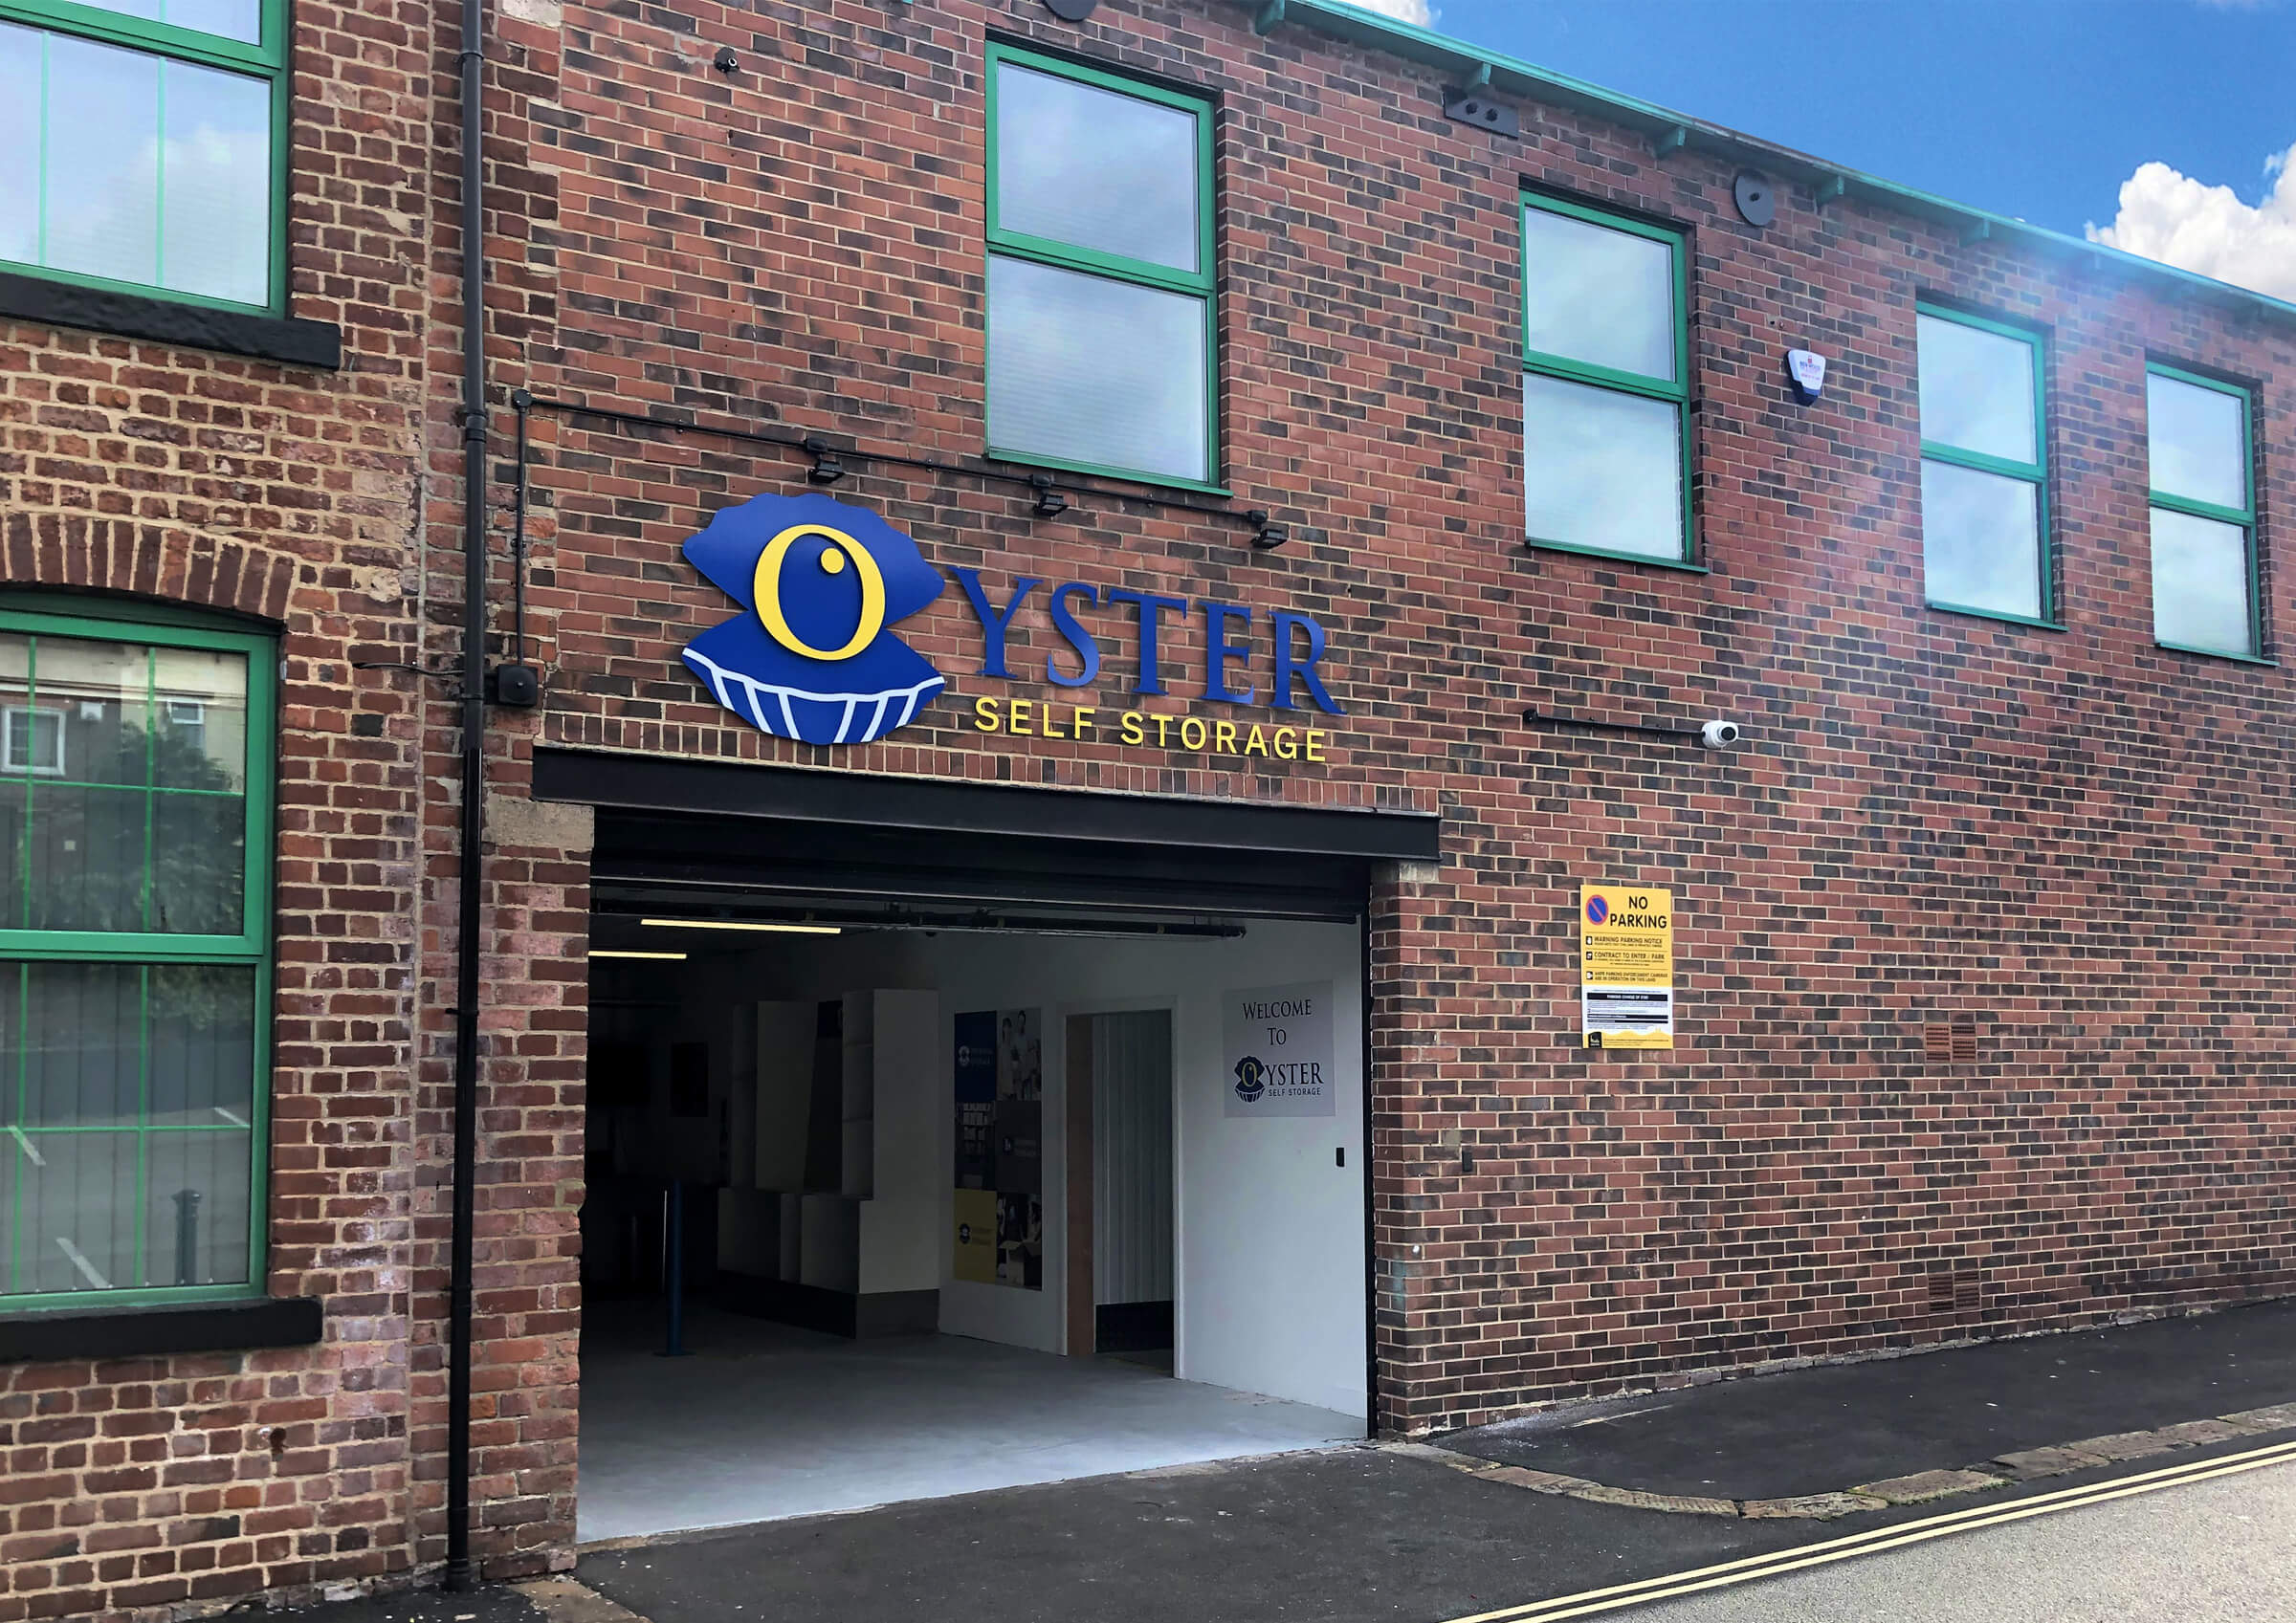 Oyster Self Storage building